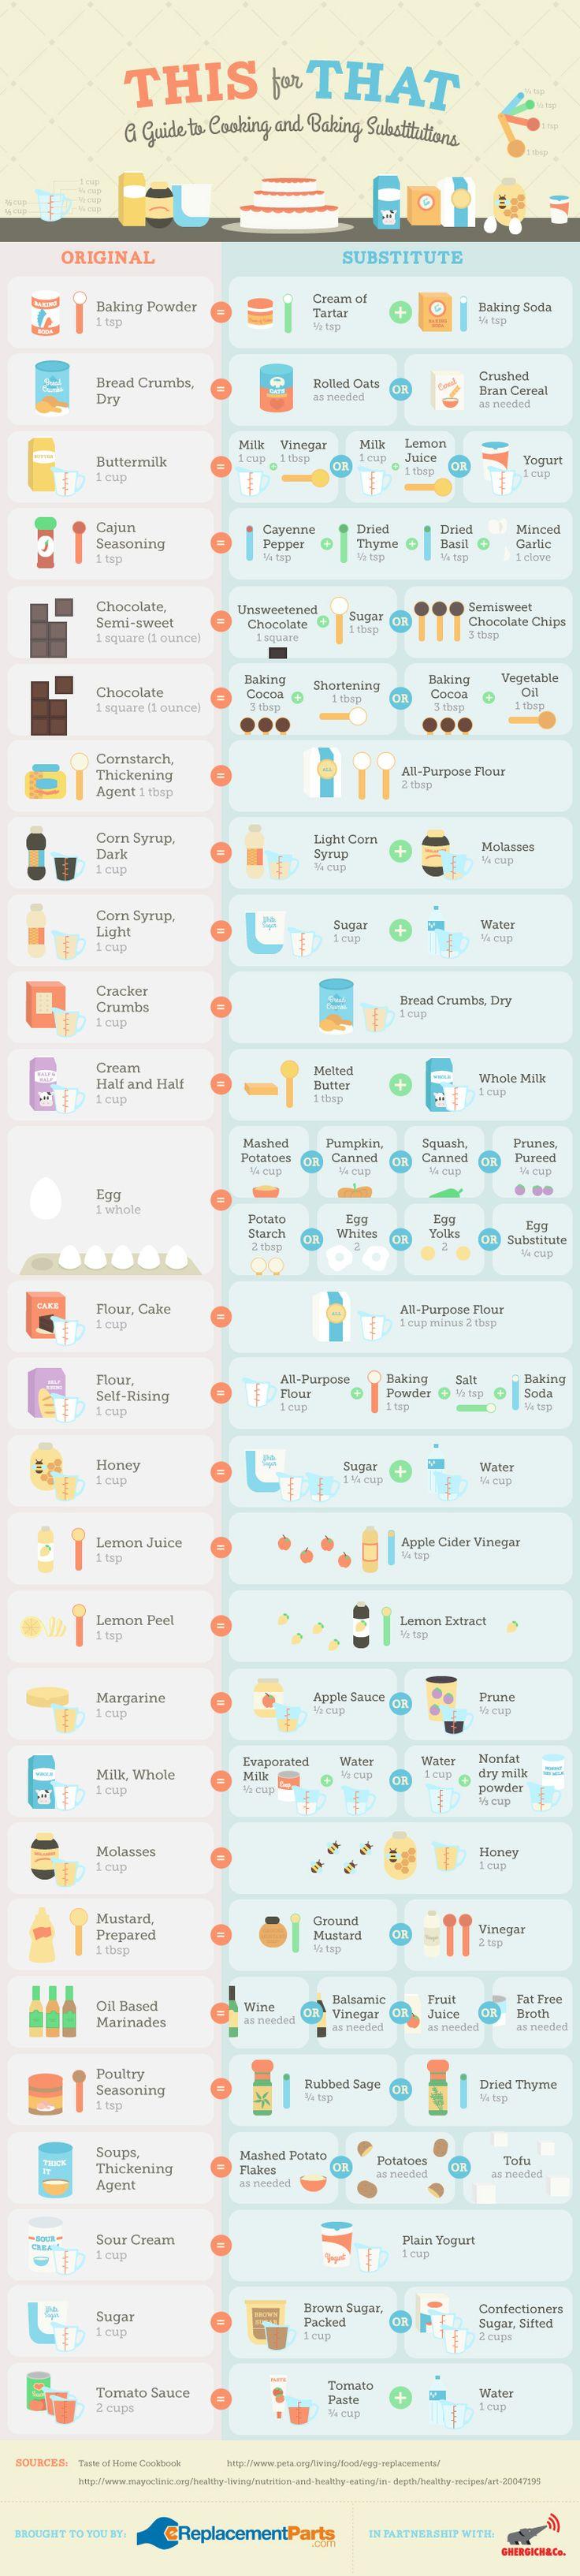 A Guide to Baking and Cooking Substitutions Infographic - Cooking doesn't have to be linear. You can cook with so many different types of substitute ingredients and come out with the same if not better results. This list will help you get to cooking with the ingredients you already have. No more worrying if you don't have eggs because there's always a creative and potentially healthier way to substitute ingredients.